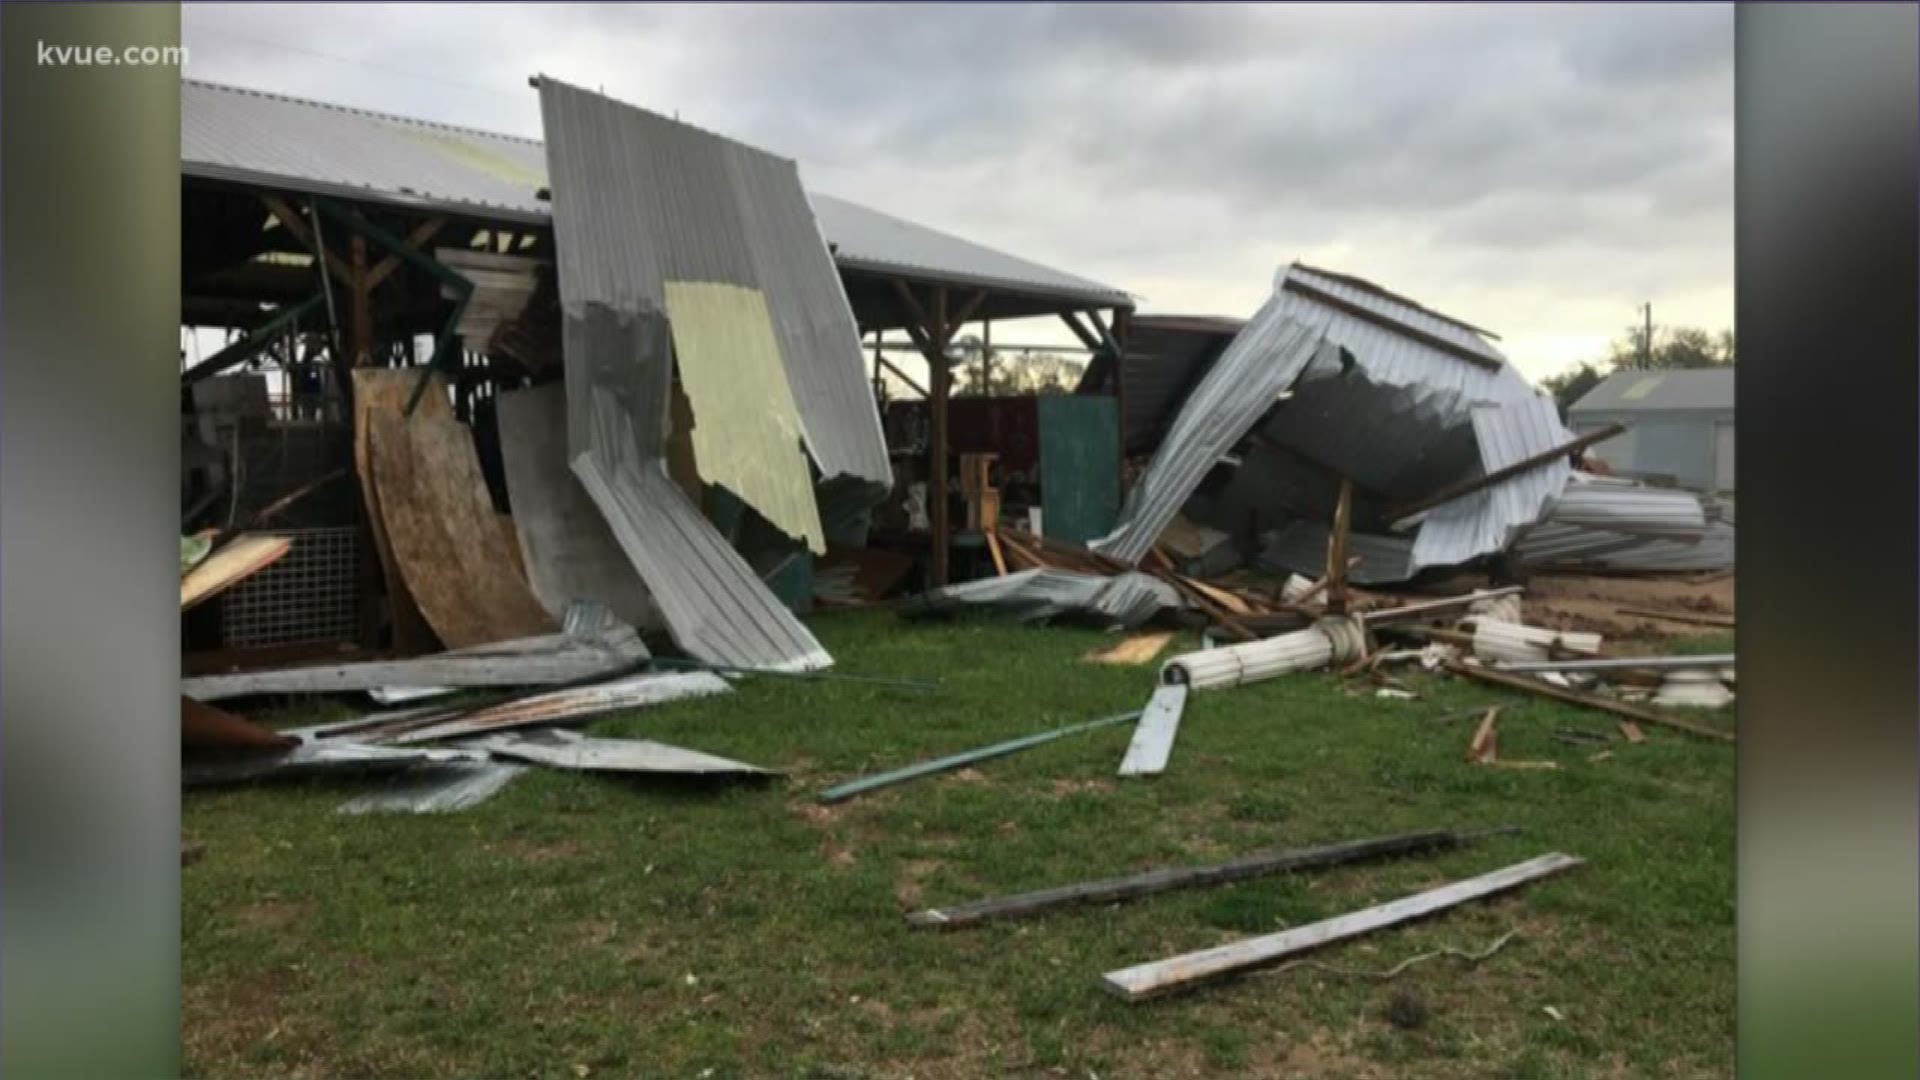 Friday night's storm left damage across parts of Central Texas.